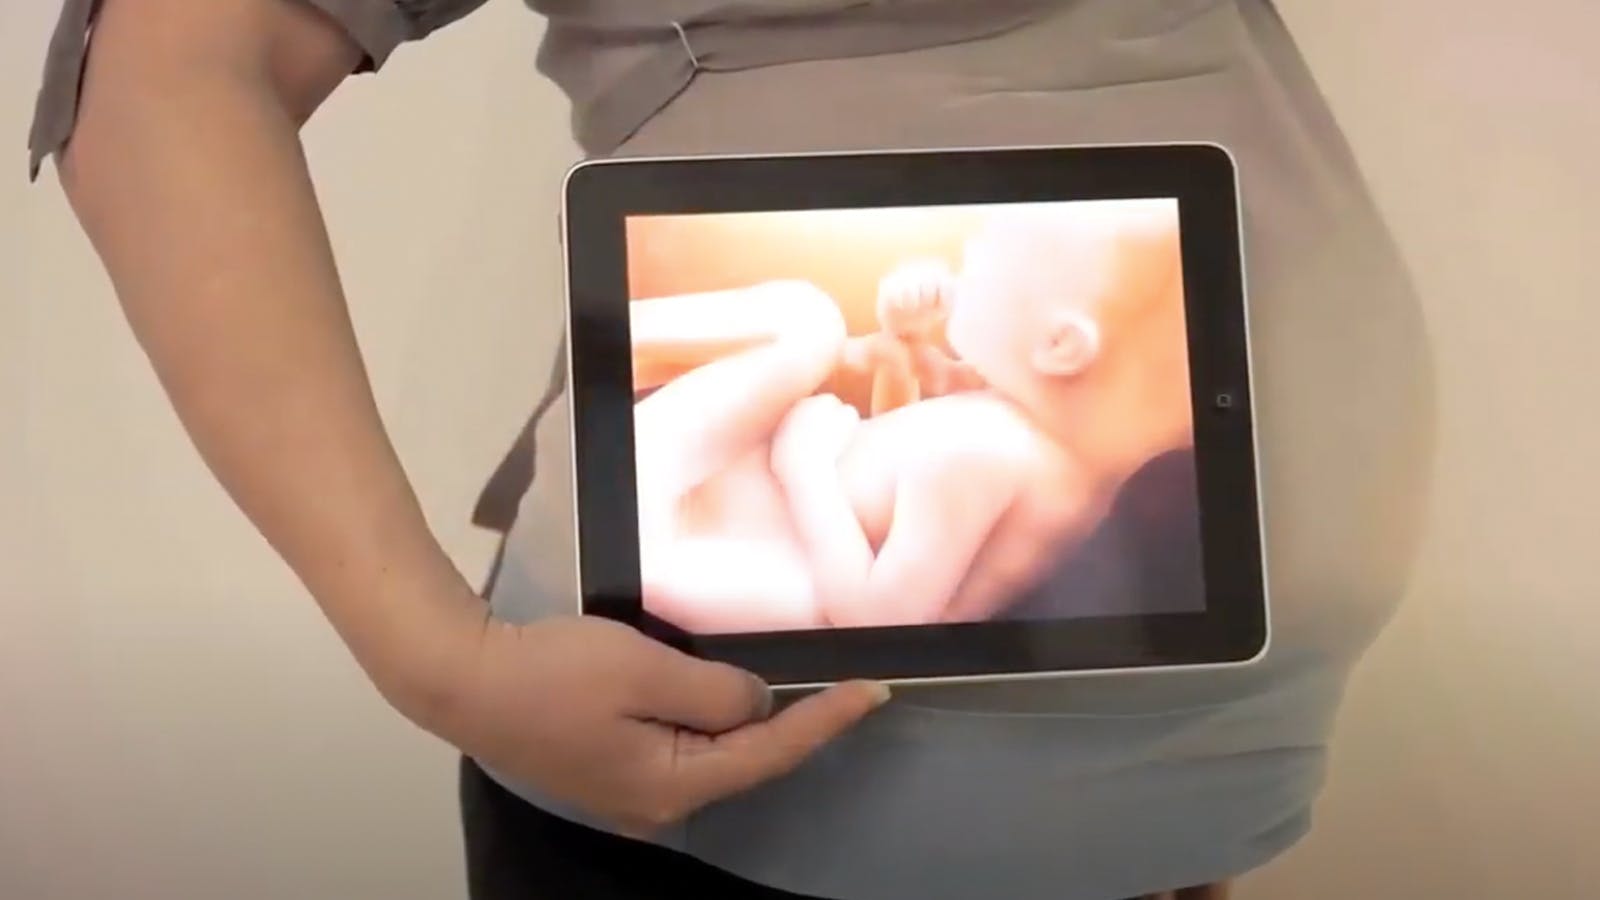 Pregnant woman holding a tablet that shows an image of the baby.